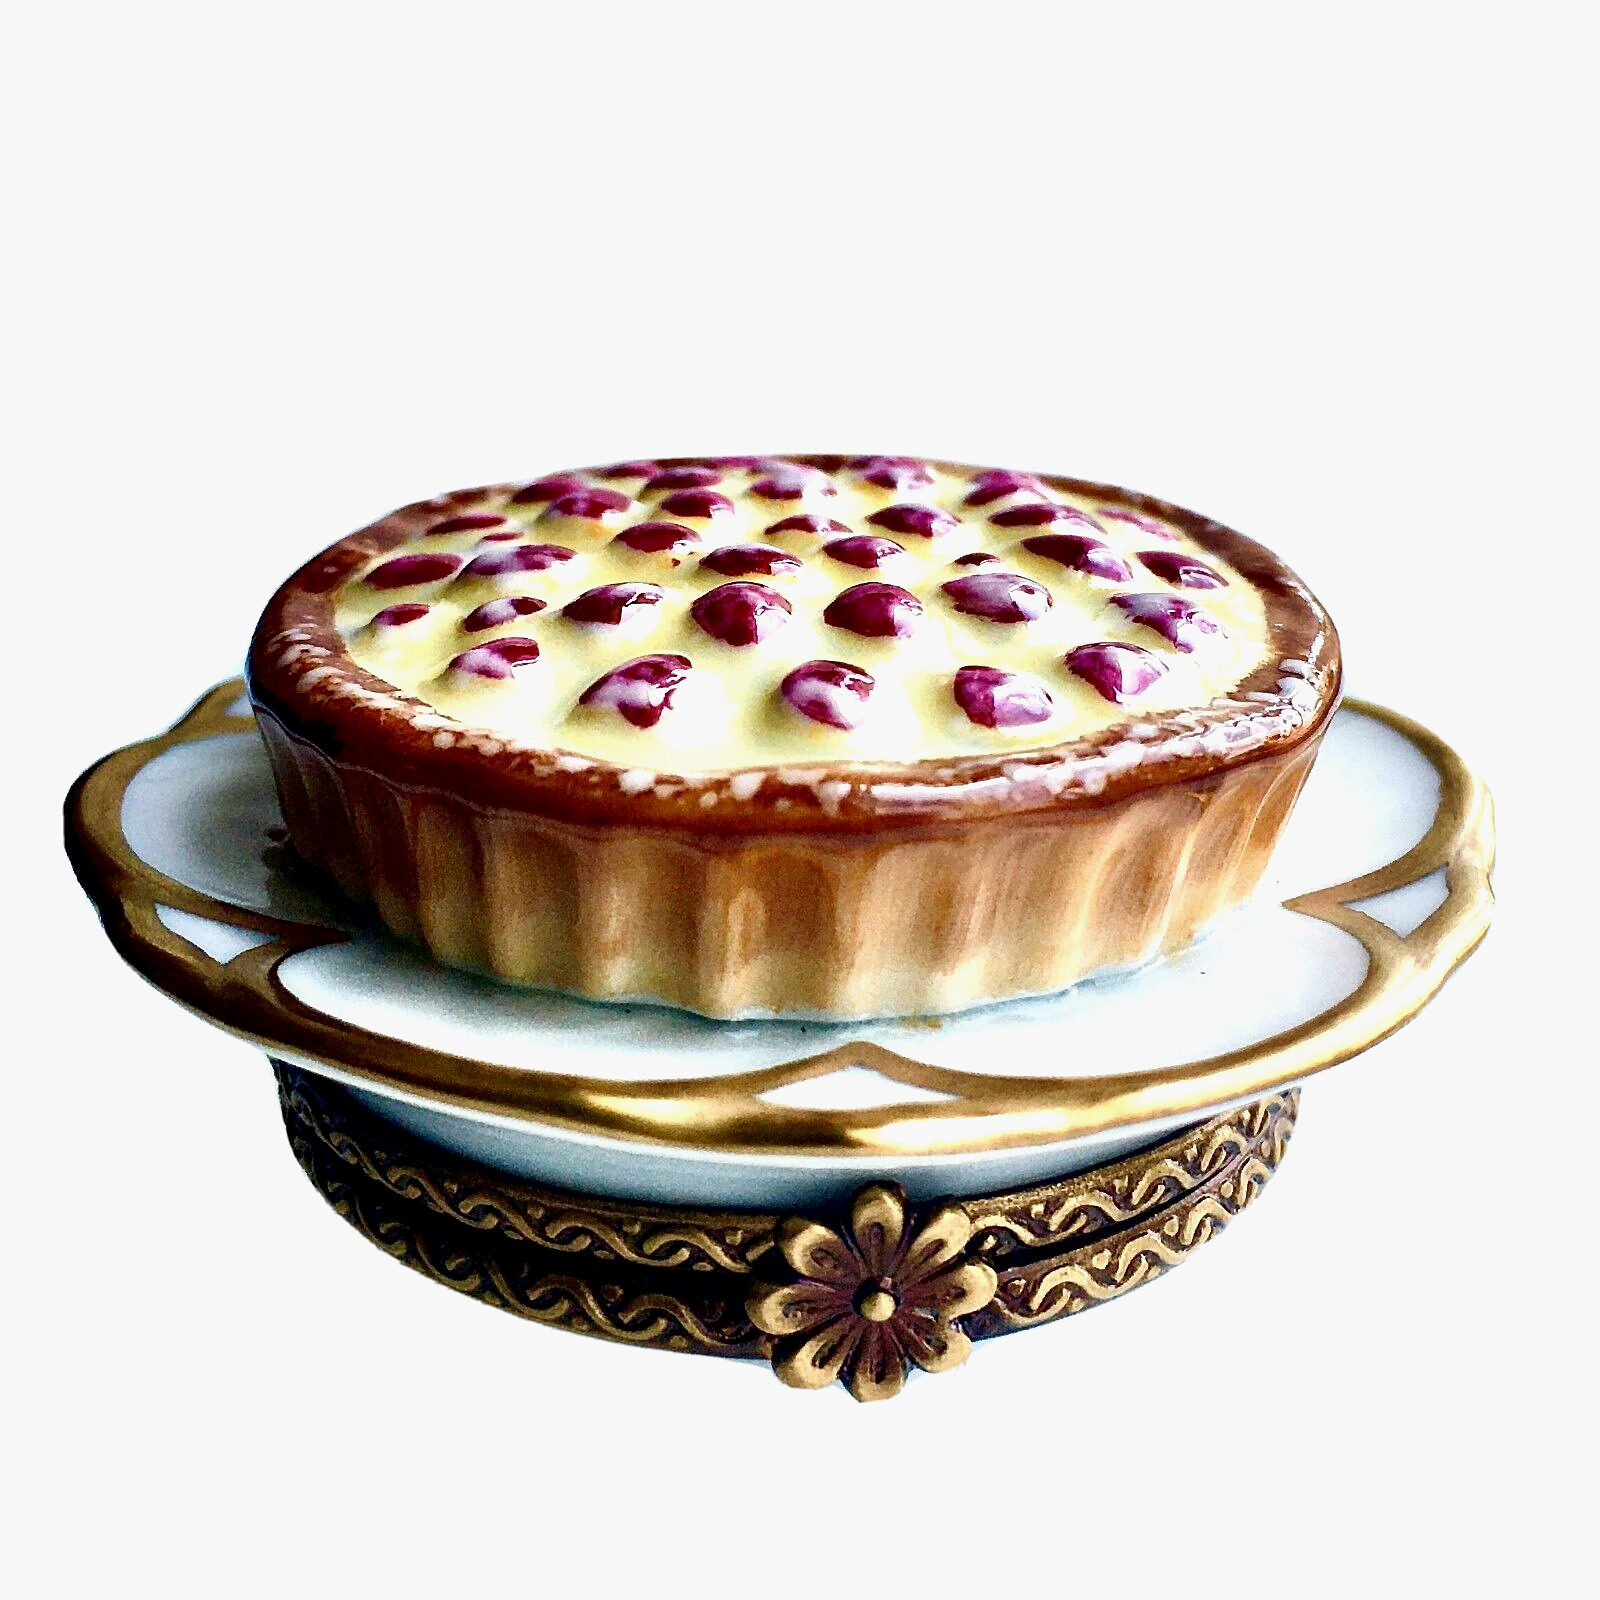 Authentic French Limoges Porcelain Trinket Box Strawberry Pie on a Platter NEW